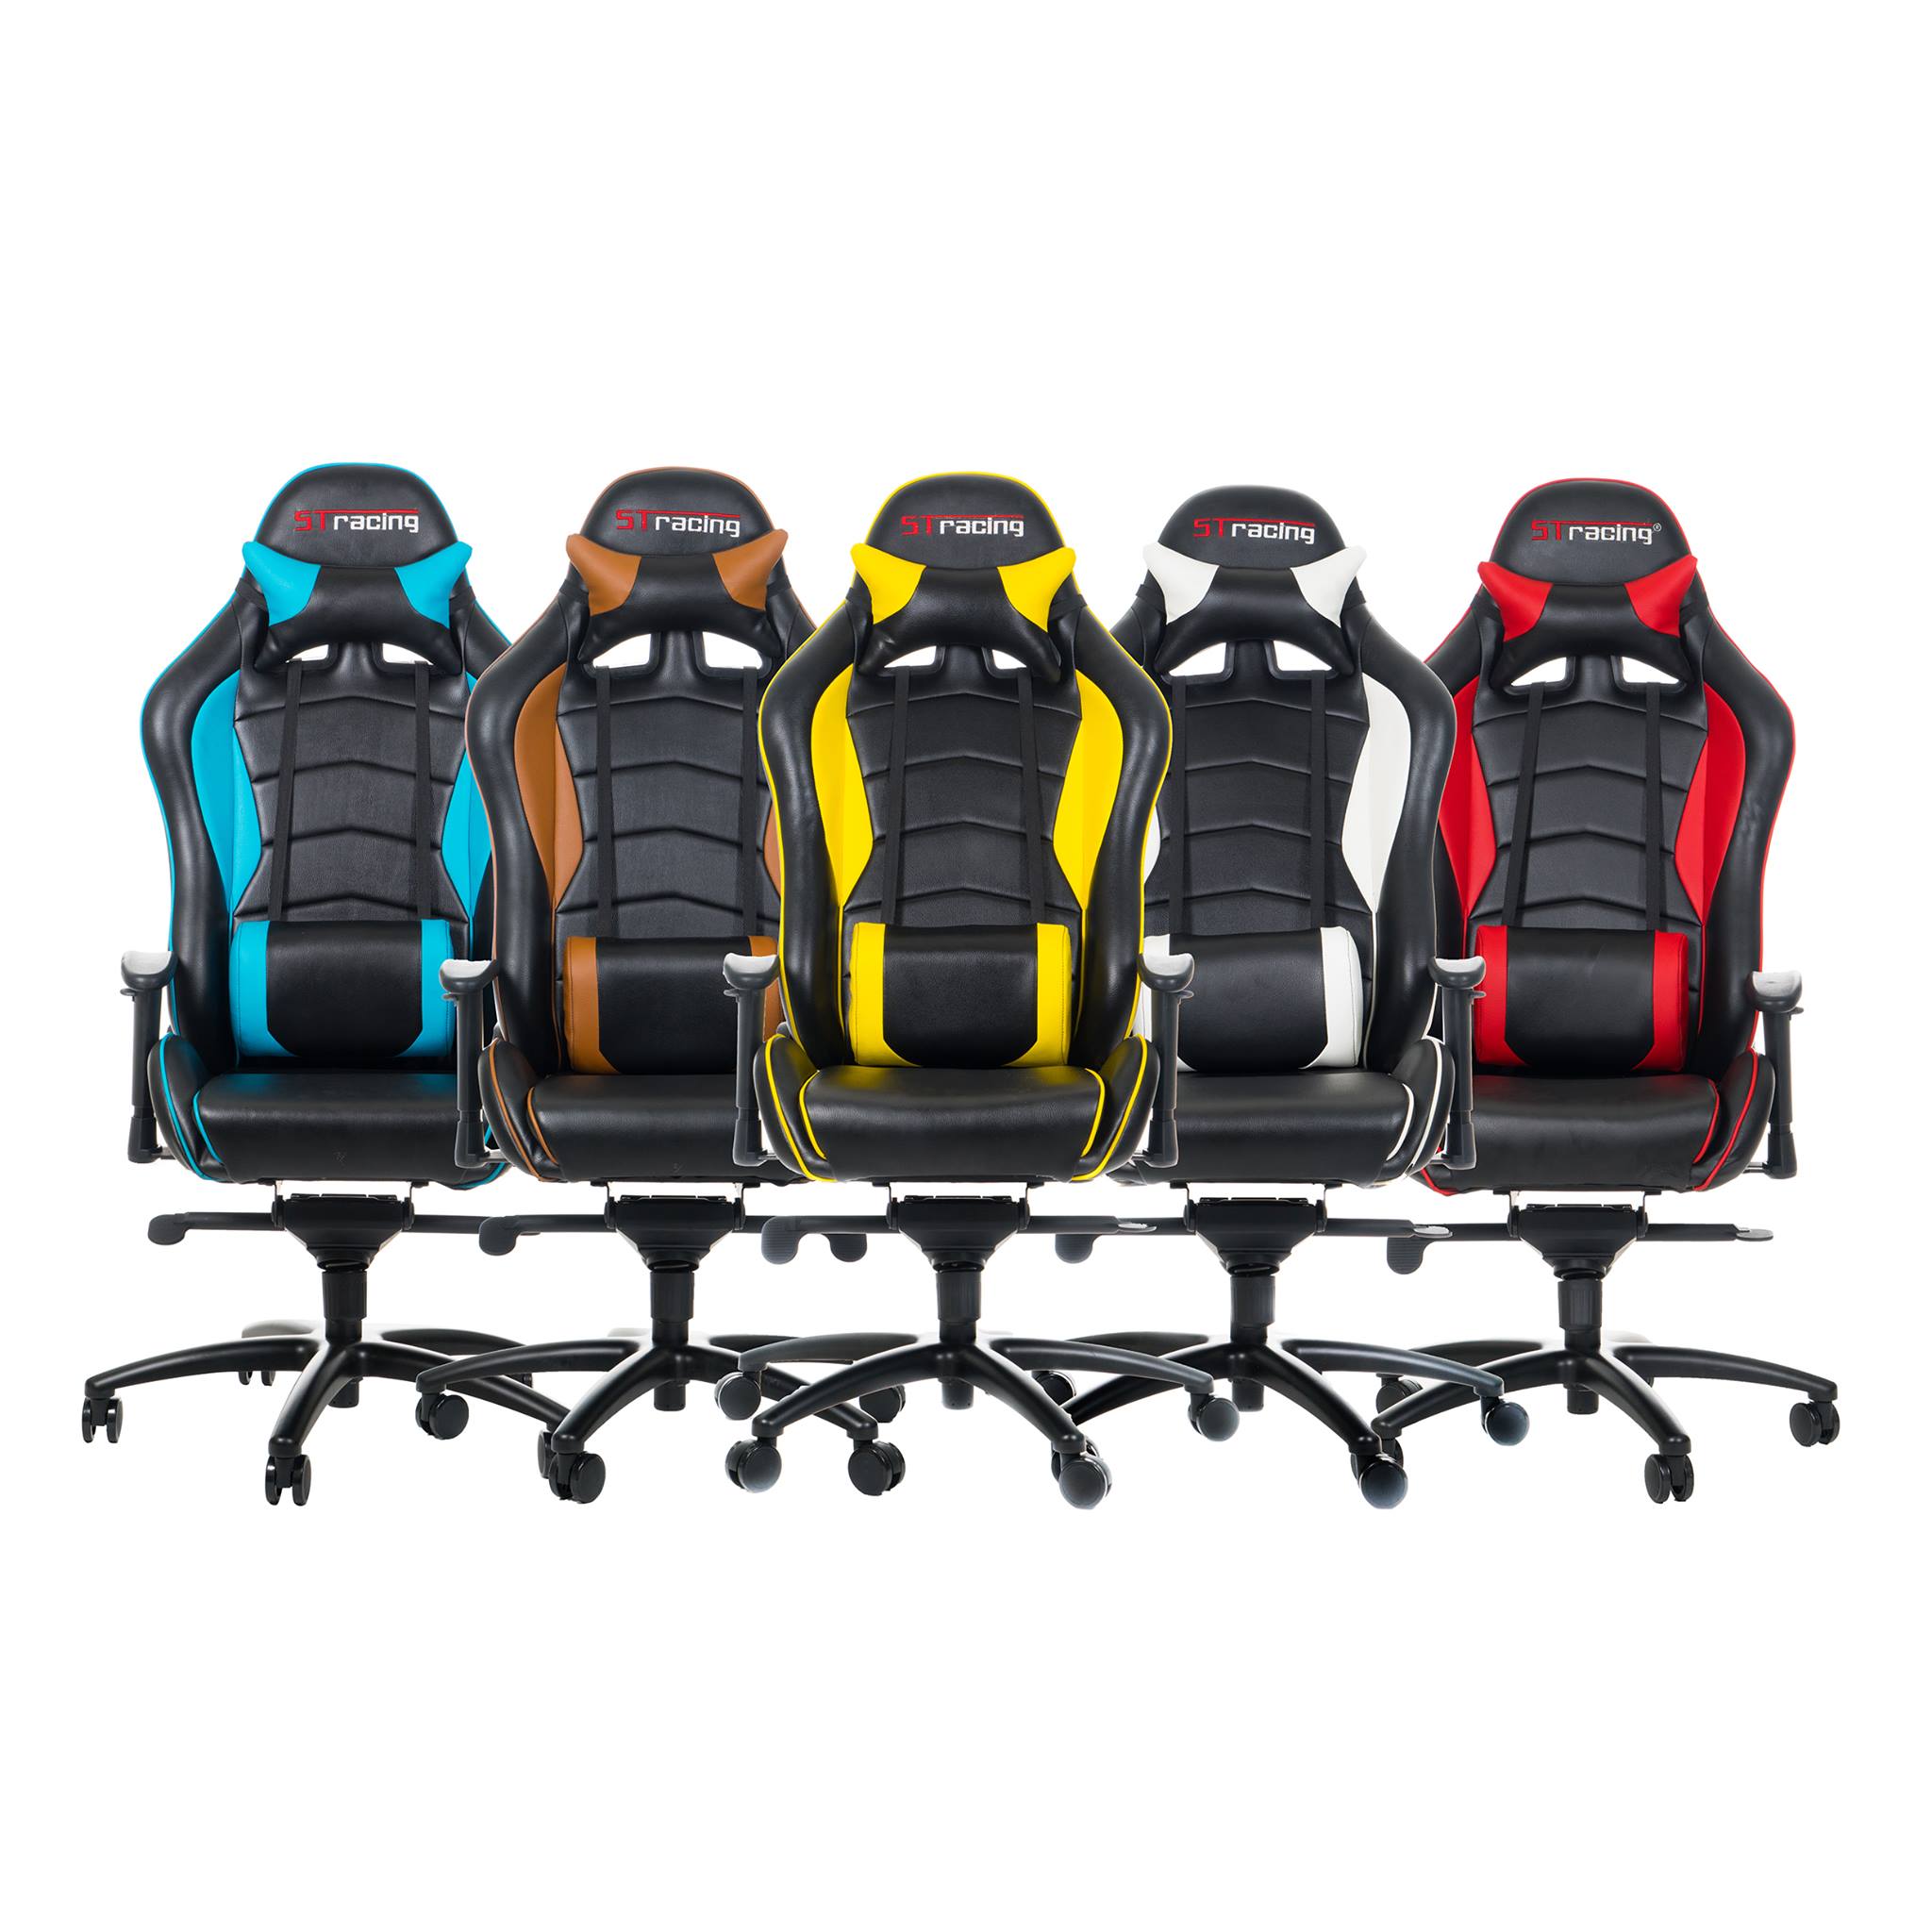 ST Racing Gaming Chair